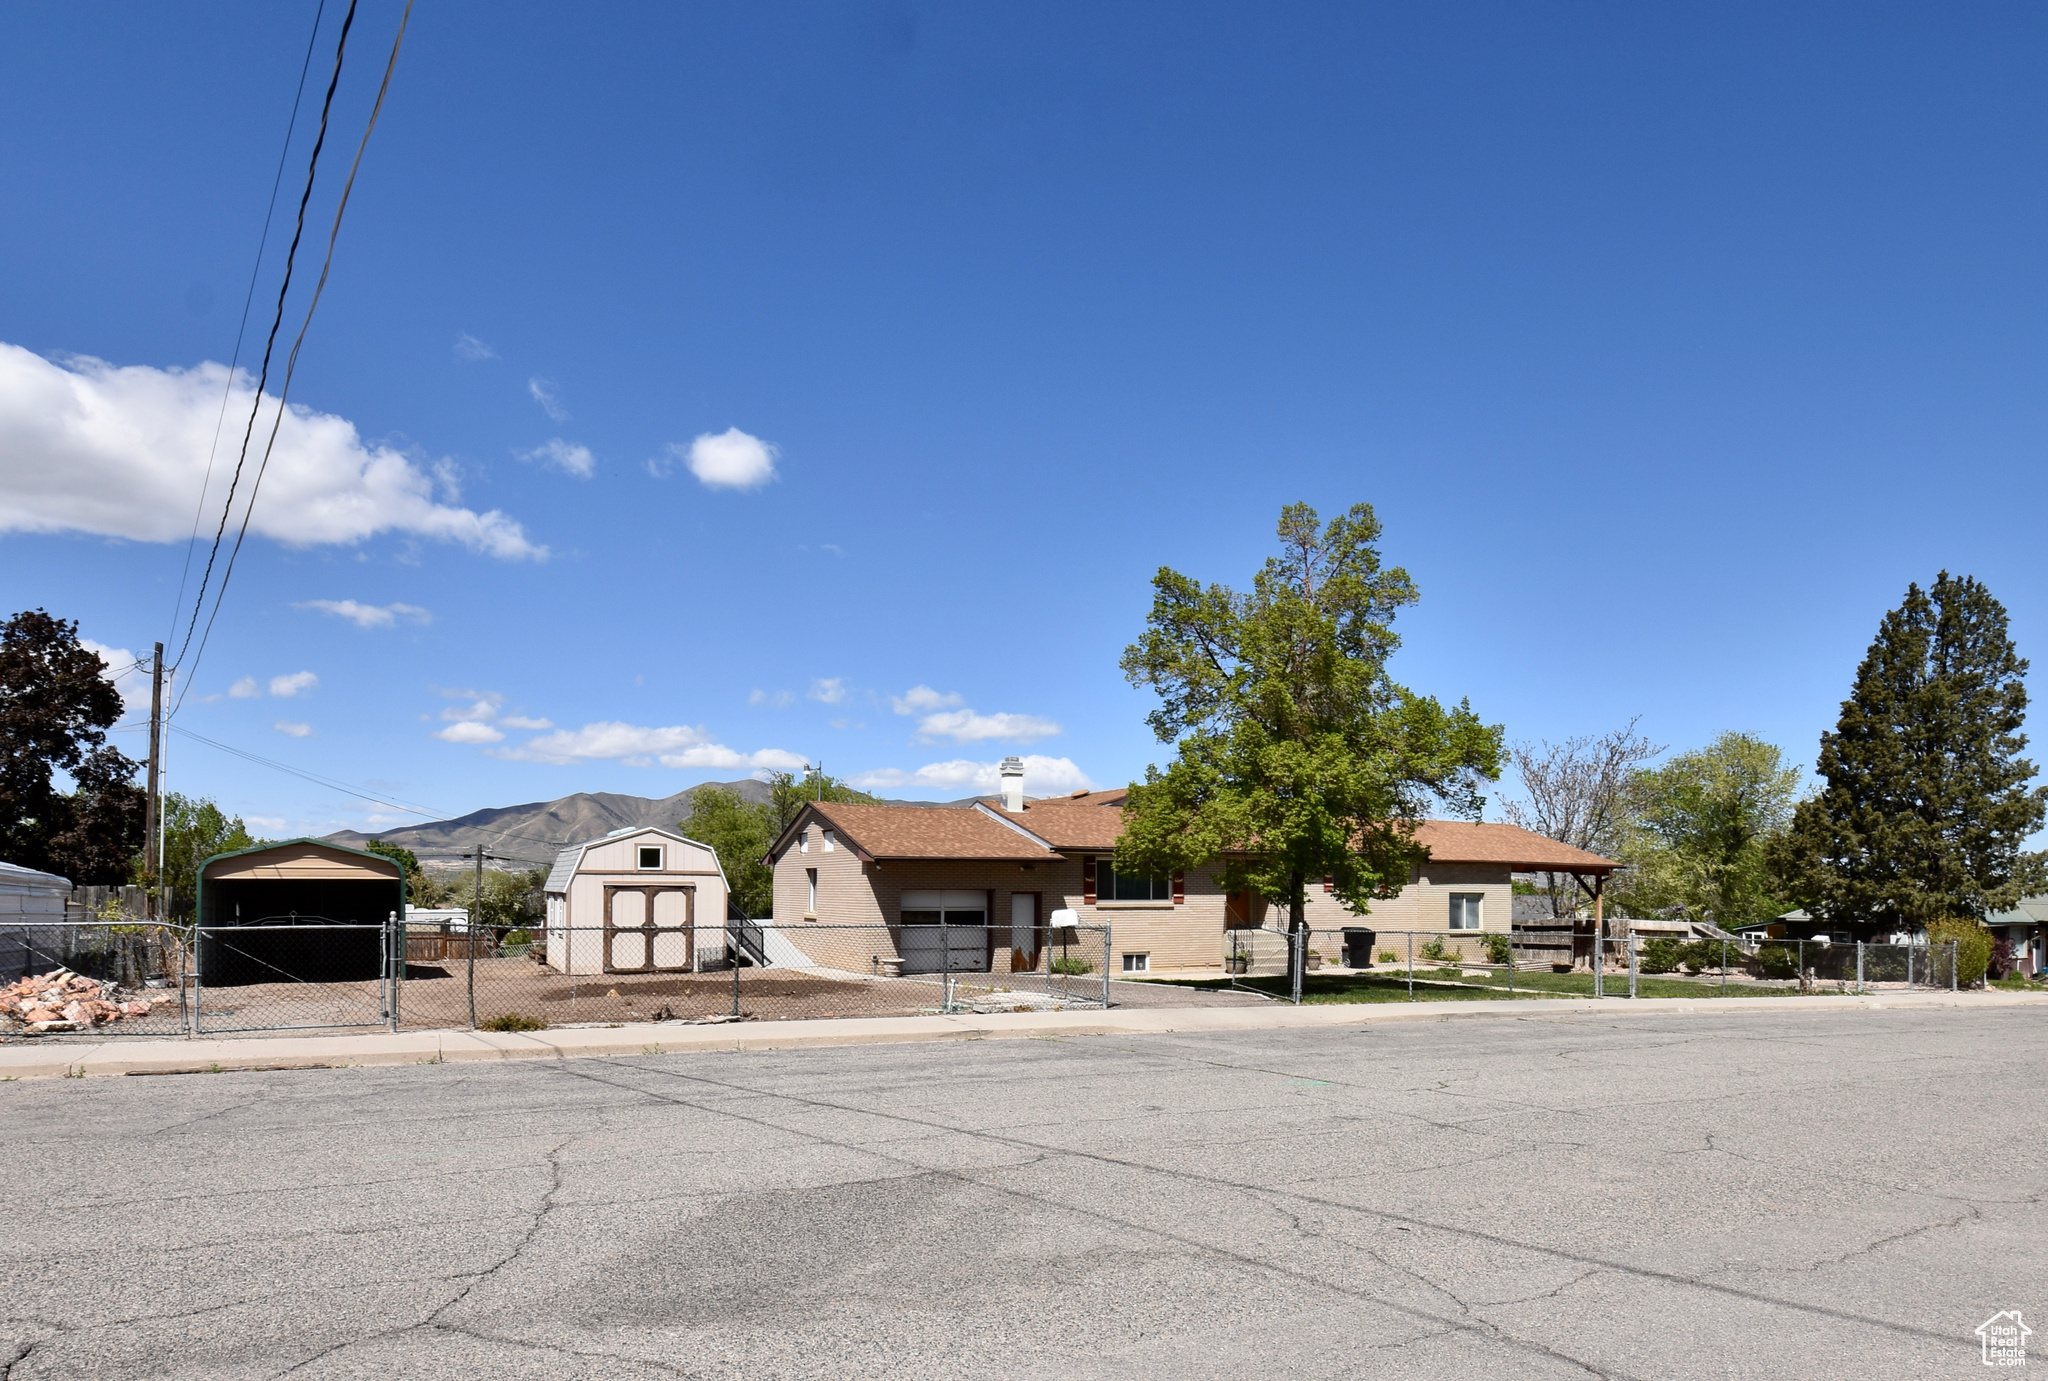 484 S 300 W, Payson, Utah 84651, 3 Bedrooms Bedrooms, 13 Rooms Rooms,2 BathroomsBathrooms,Residential,For sale,300,1995809